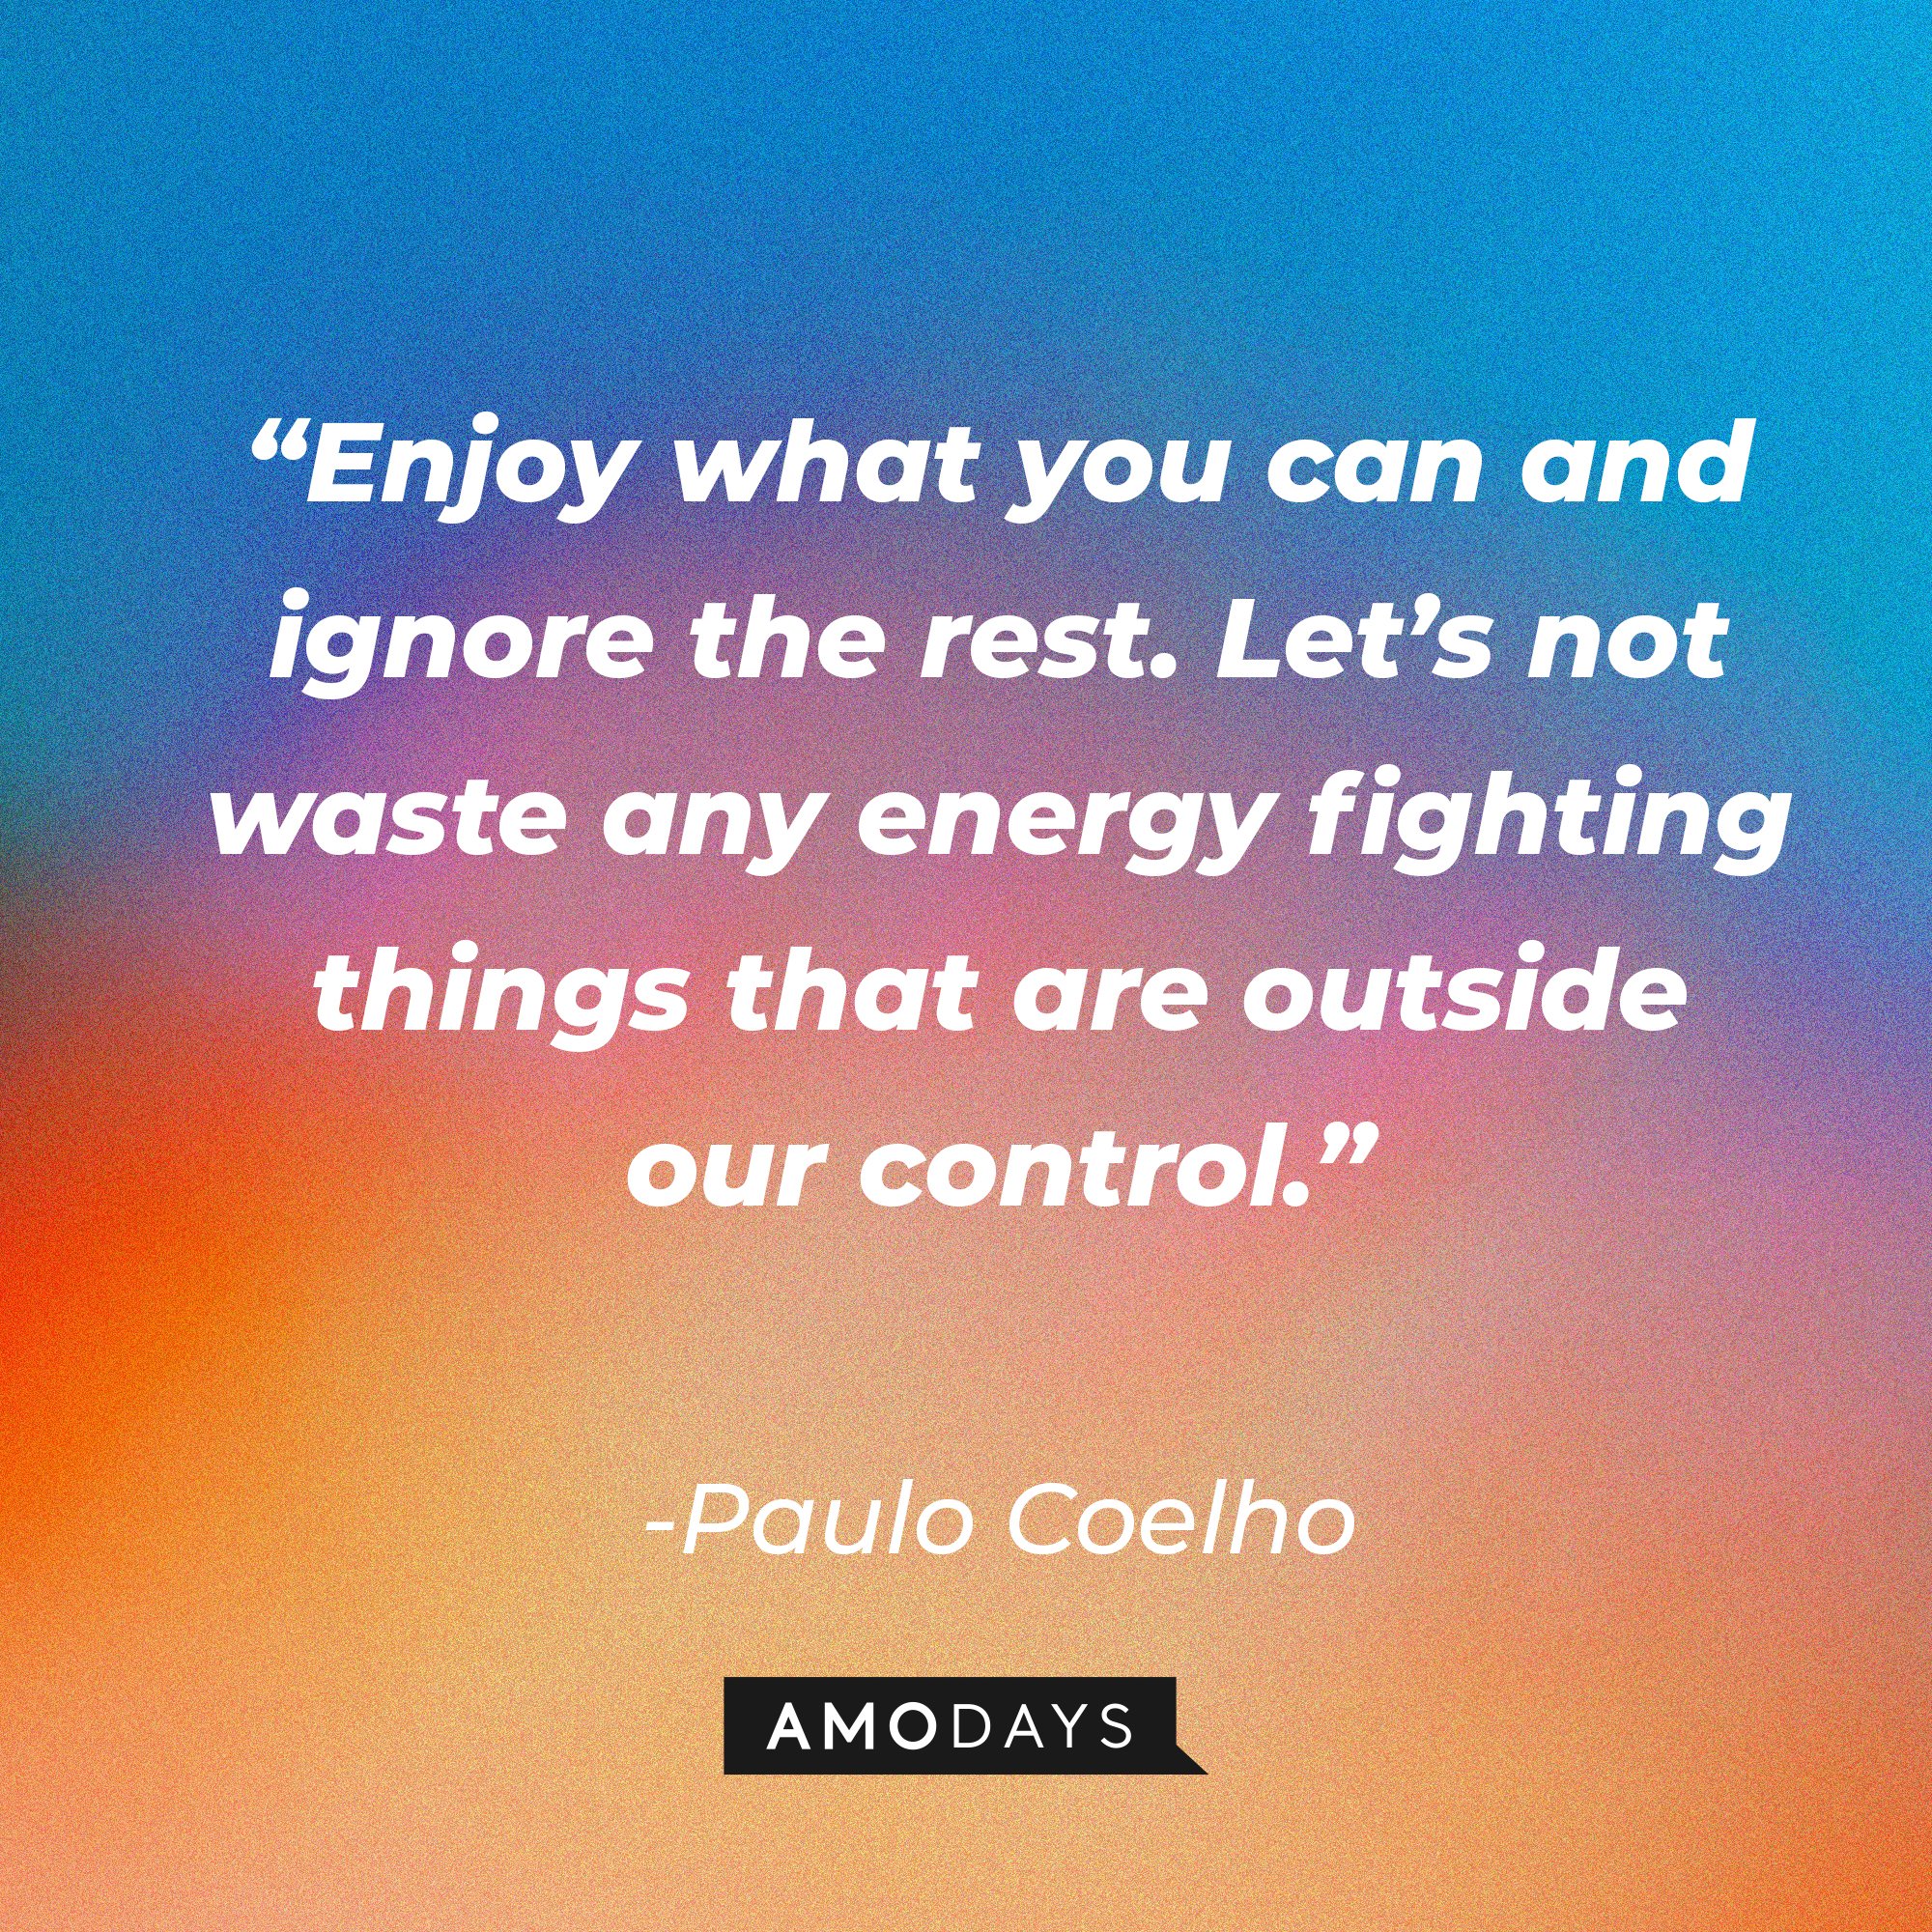 Paulo Coelho's quote: “Enjoy what you can and ignore the rest. Let’s not waste any energy fighting things that are outside our control.” | Image: AmoDays